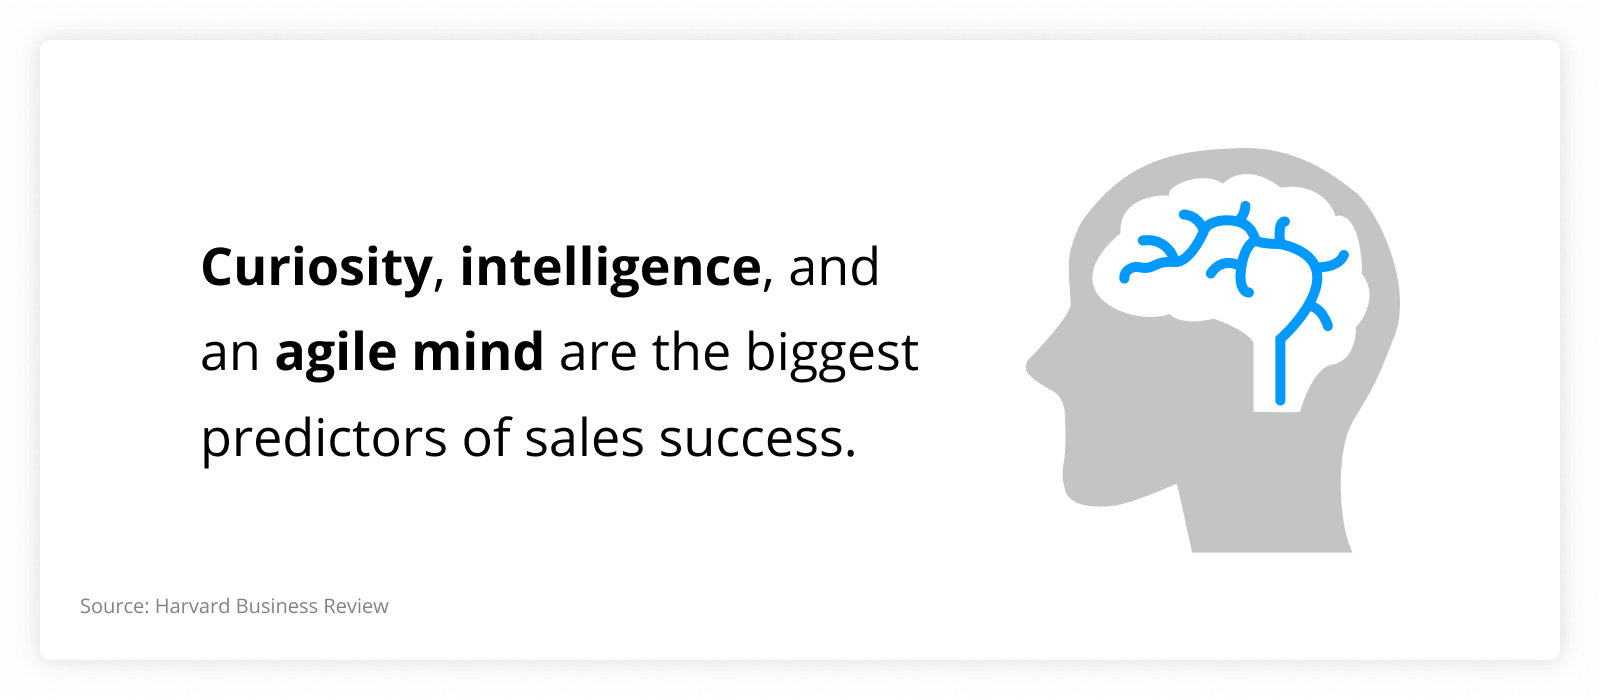 graph showing that Curiosity, intelligence, and an agile mind are the biggest predictors of sales success.